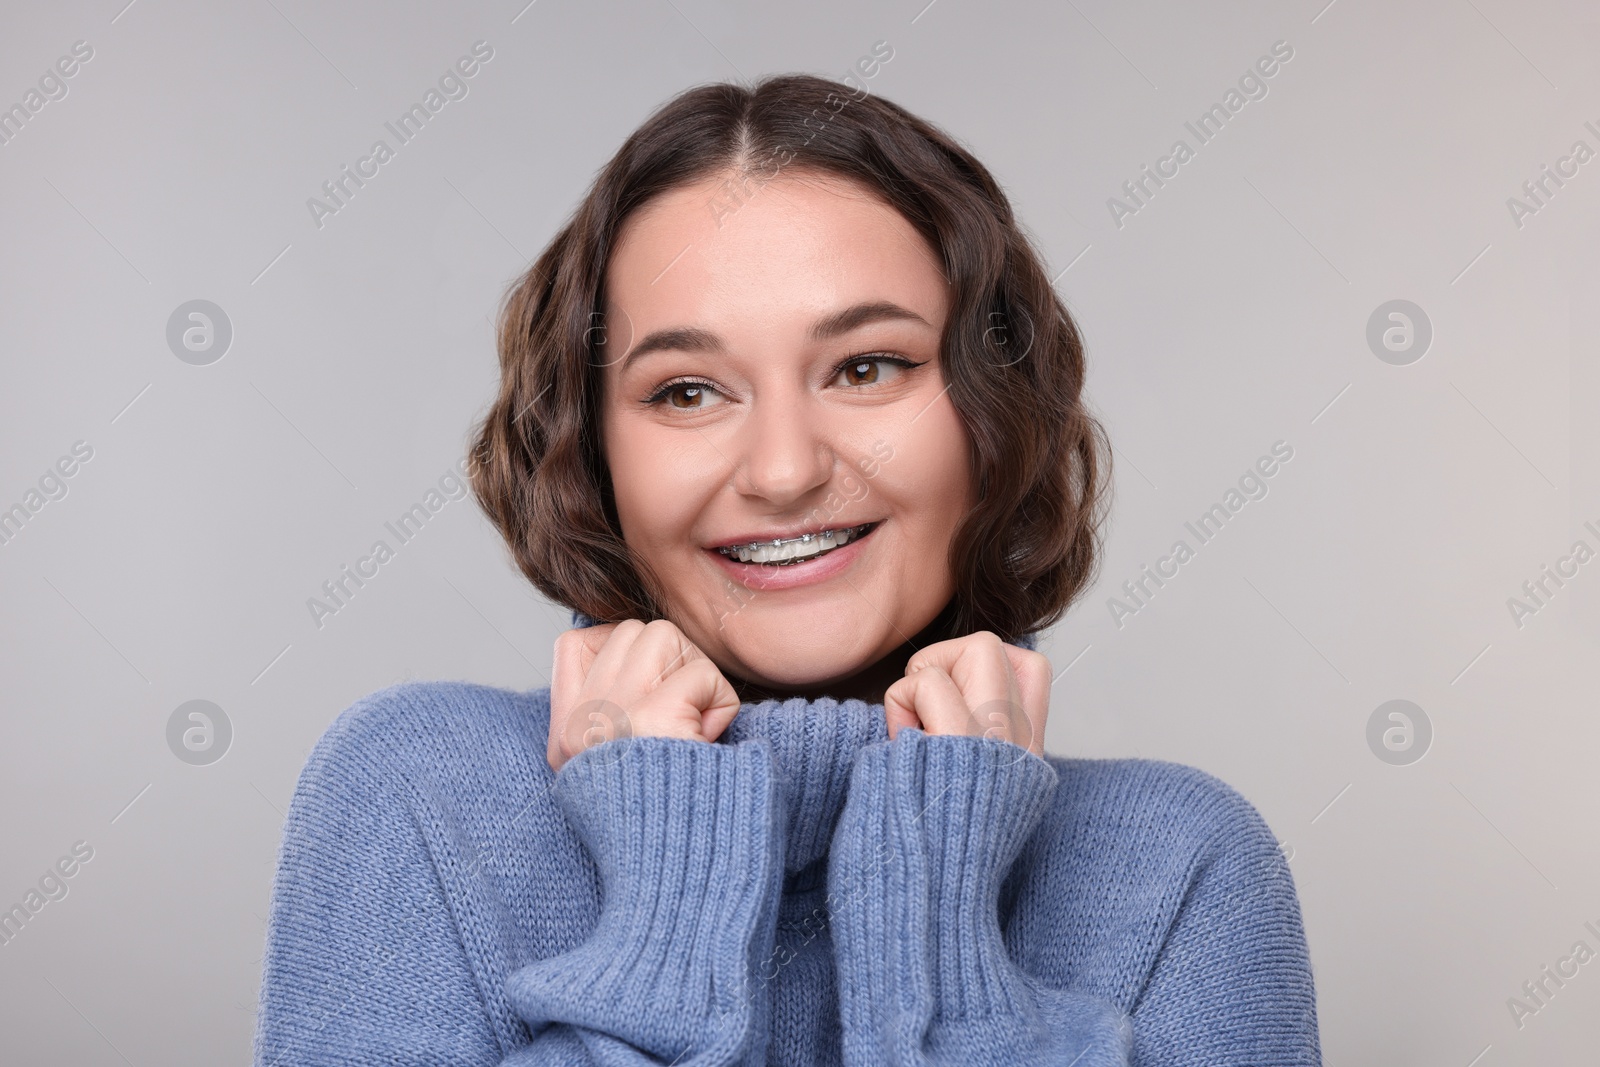 Photo of Smiling woman with dental braces in warm sweater on grey background